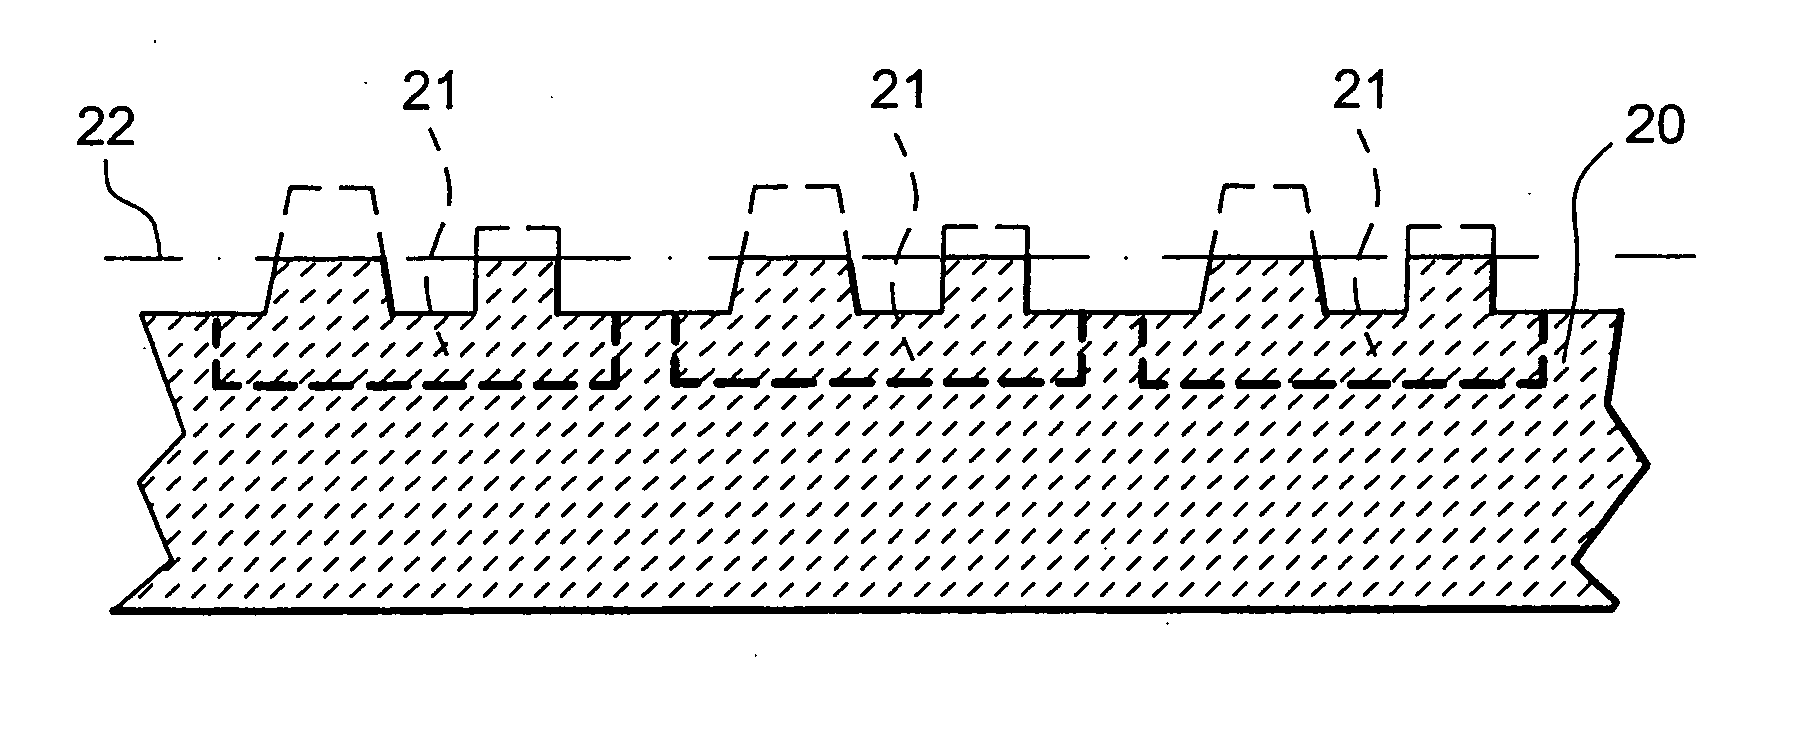 Method for handling semiconductor layers in such a way as to thin same